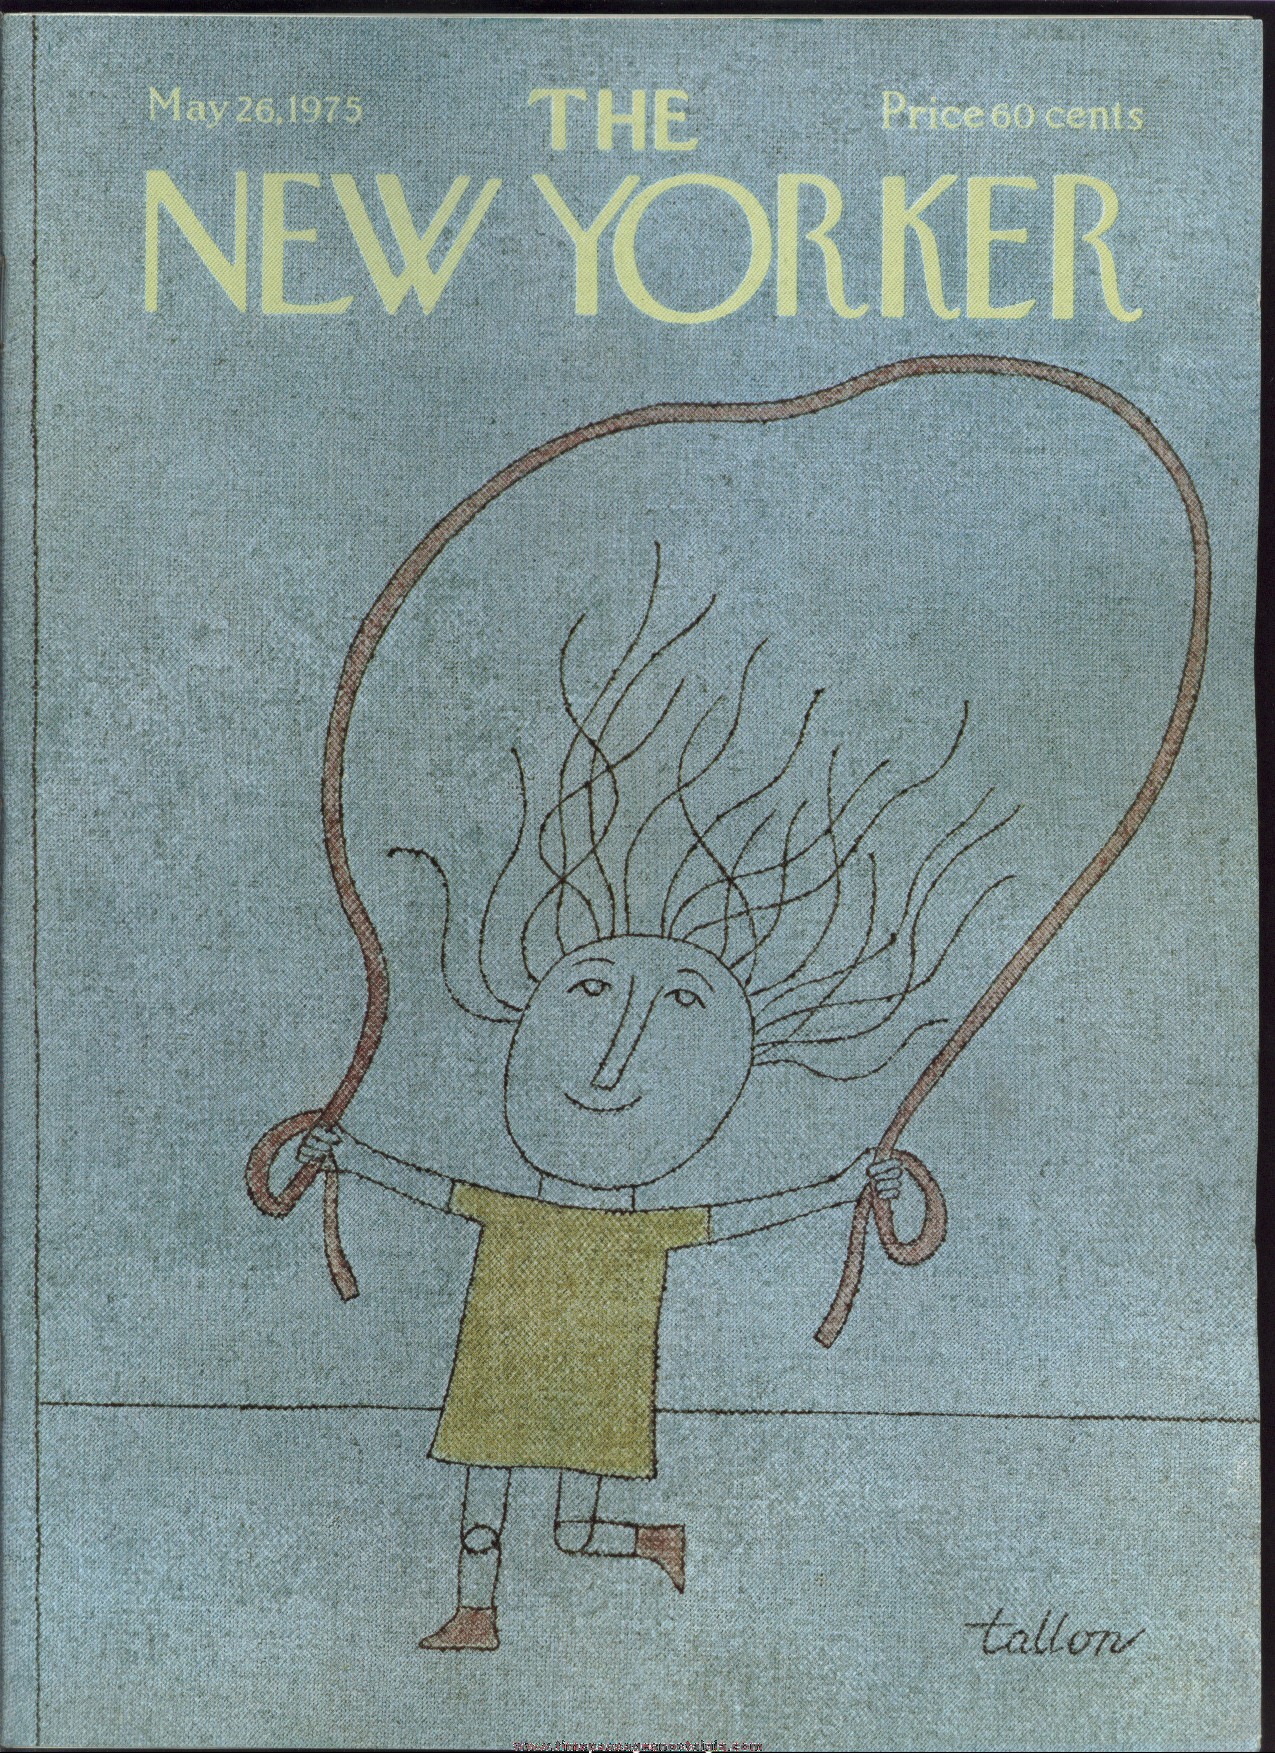 New Yorker Magazine - May 26, 1975 - Cover by Robert Tallon